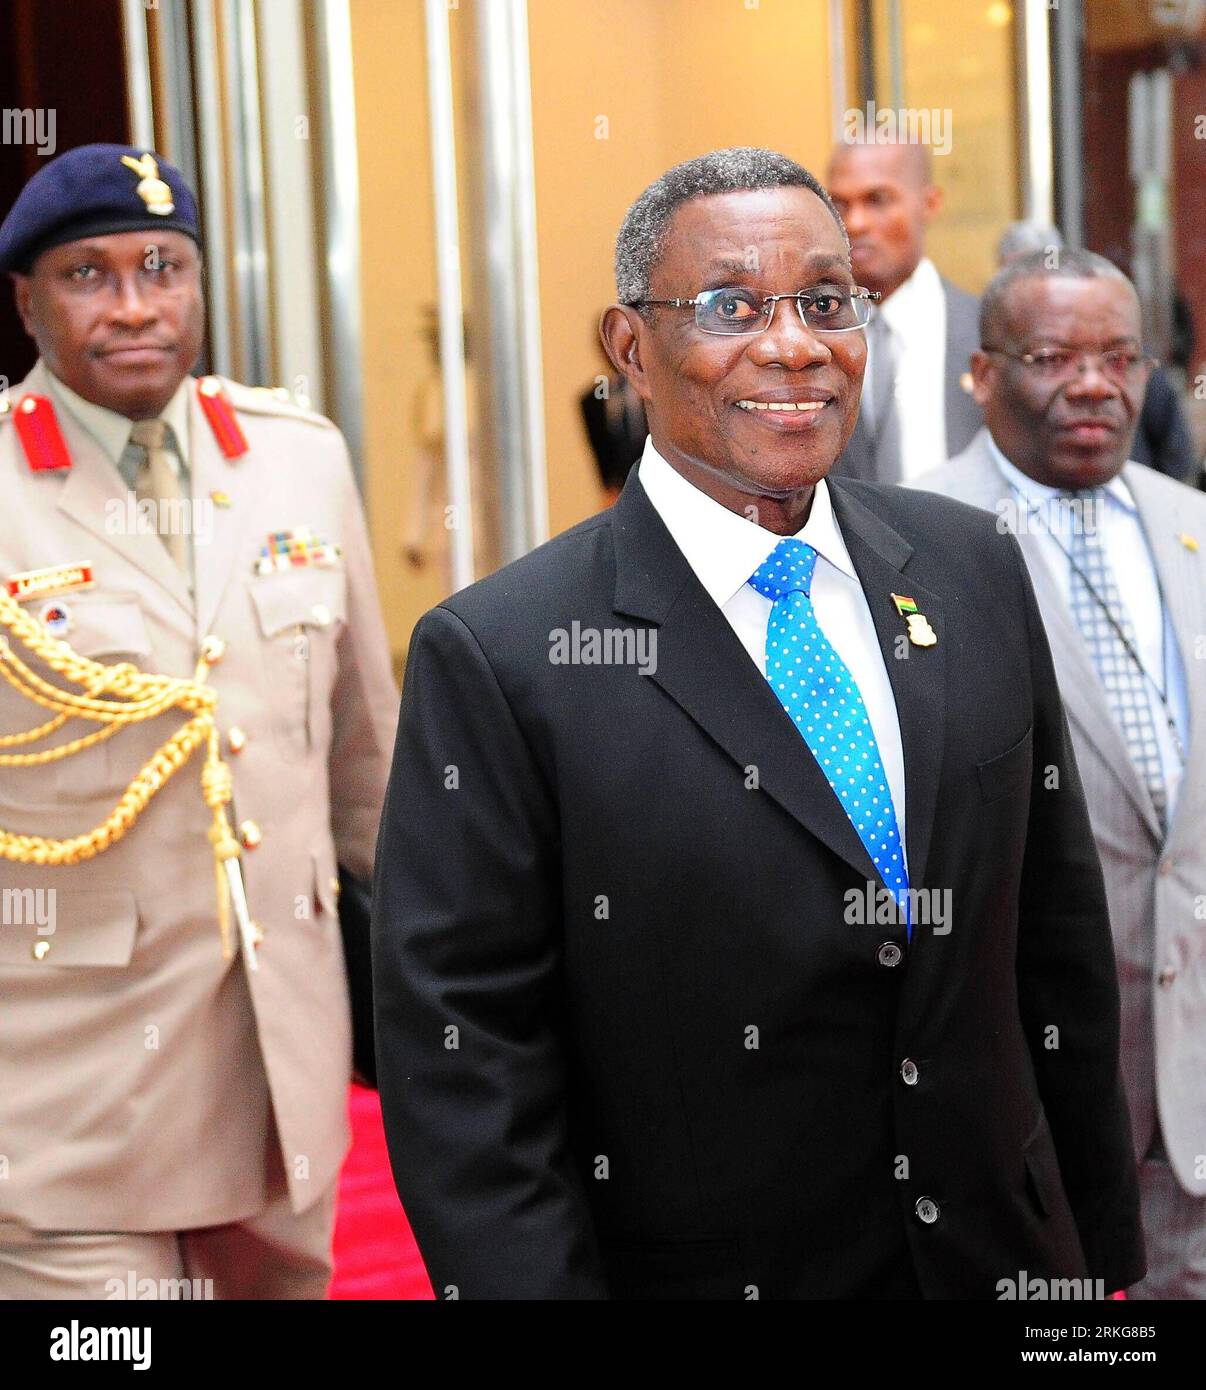 Bildnummer: 55564271  Datum: 01.07.2011  Copyright: imago/Xinhua (110702) -- MALABO, July 2, 2011 (Xinhua) -- Ghanaian President John Evans Atta Mills attends the closing ceremony of the 17th Ordinary Session of the African Union (AU) summit in Malabo, Equatorial Guinea, July 1, 2011. African leaders held intense closed door discussions on the Libyan crisis before the two-day AU summit came to an end on Friday night. Jean Ping, the chairperson of the AU Commission told Xinhua in a brief interview that there is progress on the talks regarding the North African country. (Xinhua/Ding Haitao) (lyx Stock Photo